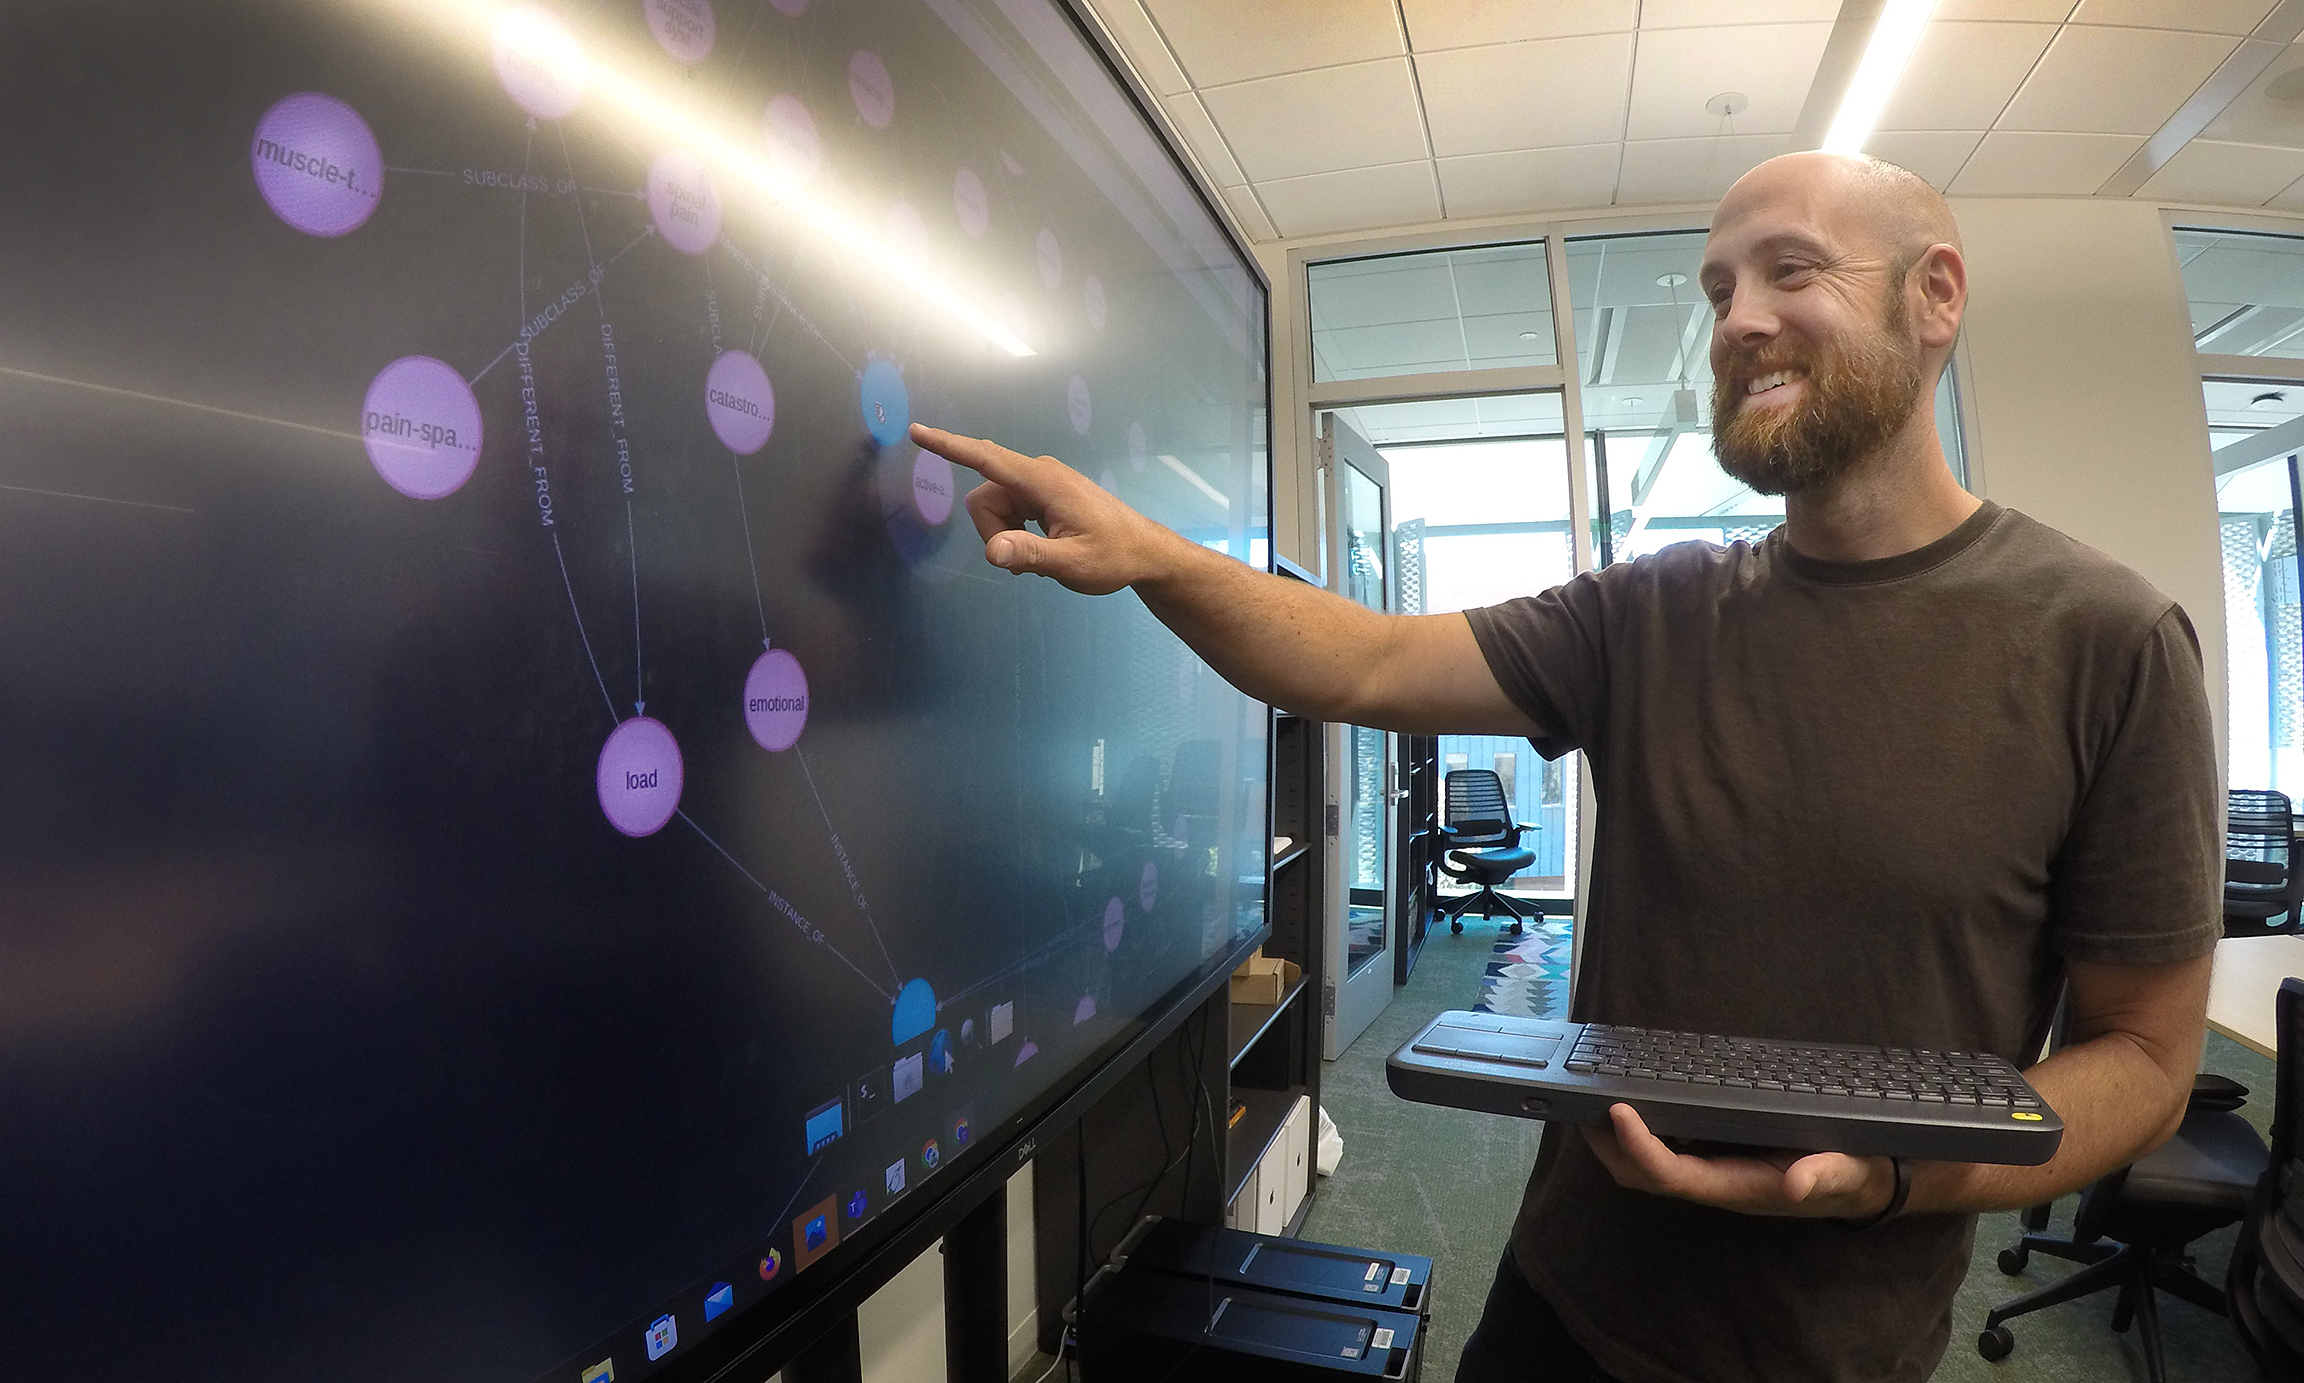 Professor points to digital graphic on the screen in a lab